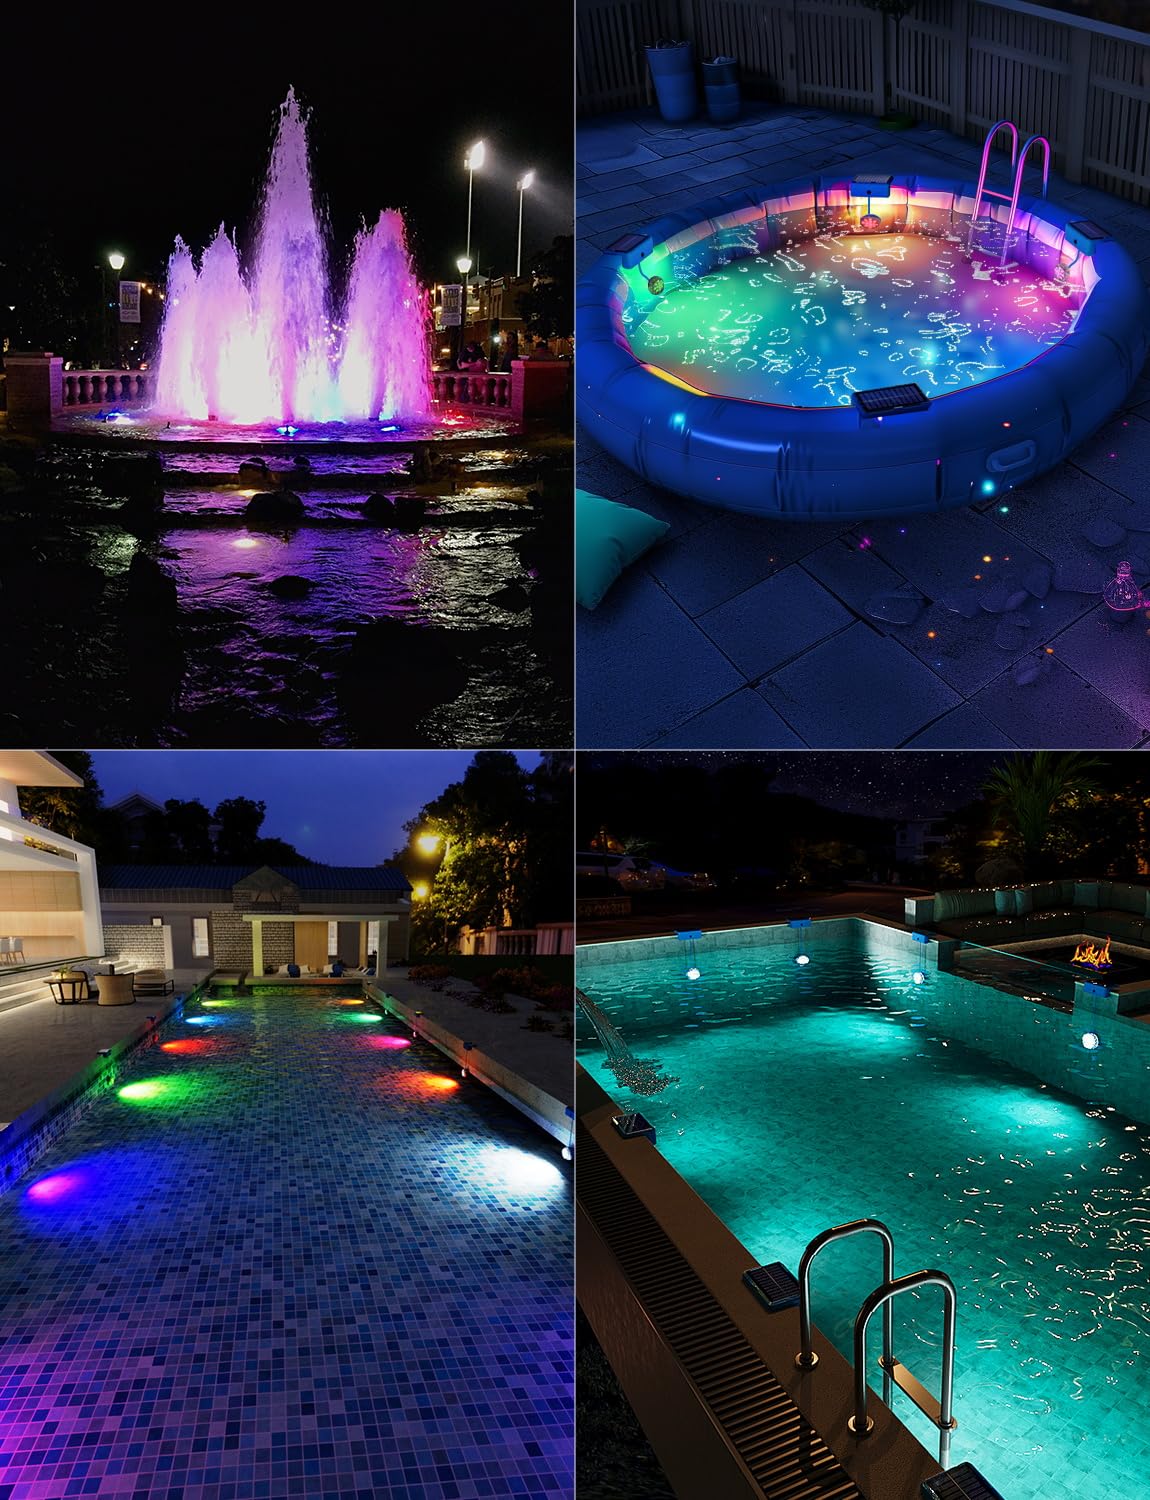 Solar Pool Lights for Inground Pools Waterproof with Remote, Outdoor Solar Lights, RGB 16 Colors Changing Submersible LED Pool Lights for Above Ground Pools Accessories, Pond, Garden Decoration, 4Pack